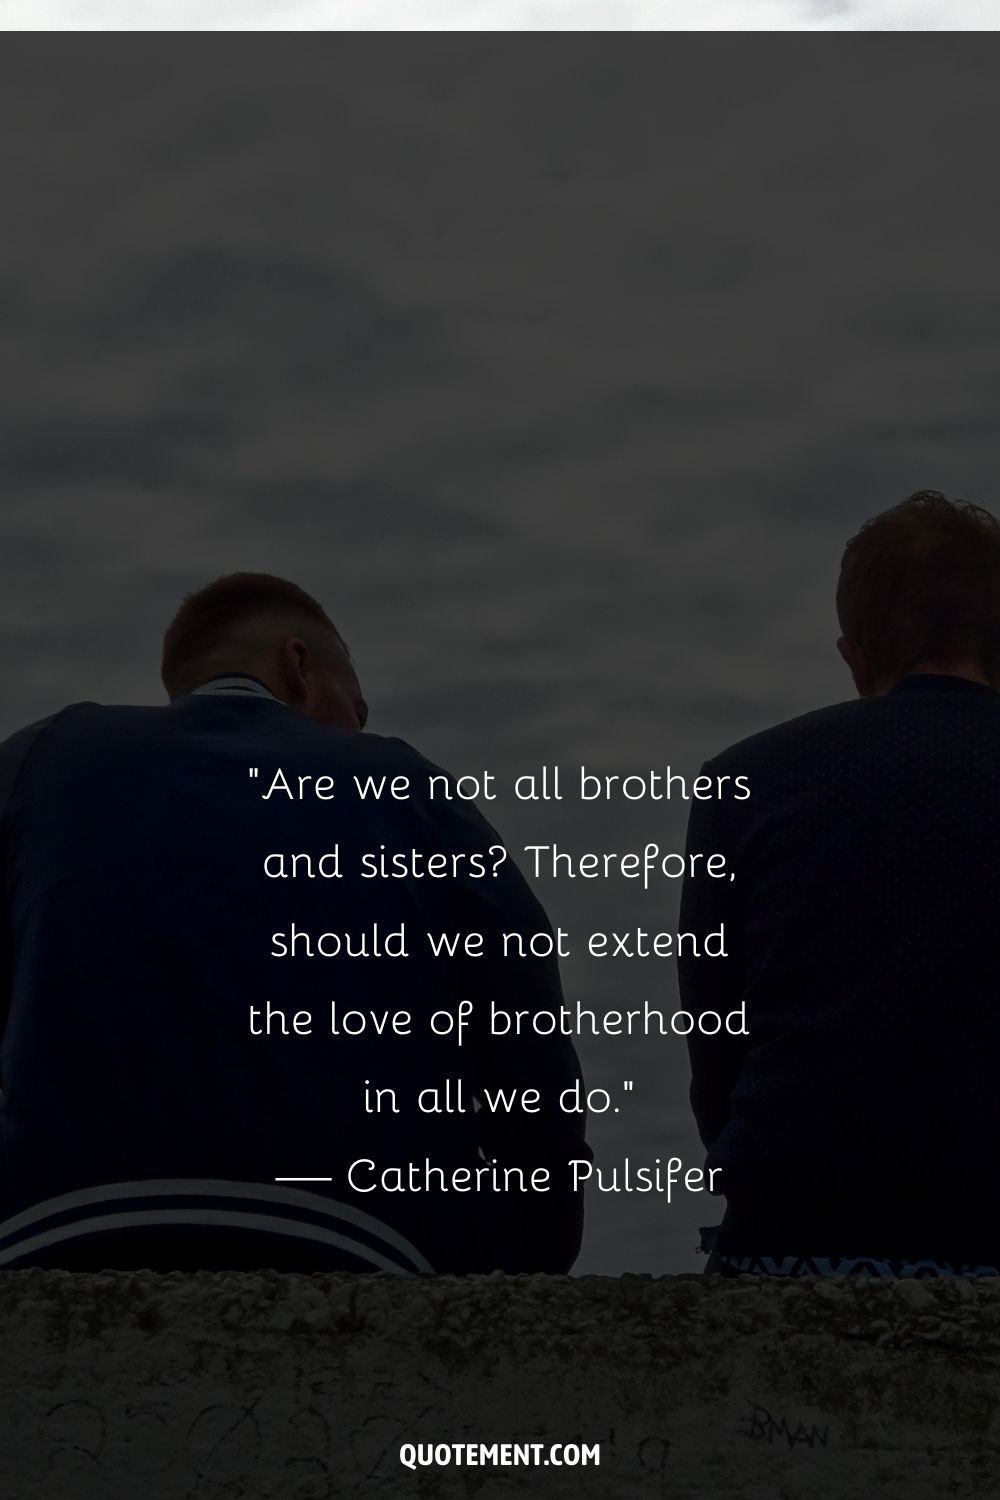 “Are we not all brothers and sisters Therefore, should we not extend the love of brotherhood in all we do.” — Catherine Pulsifer